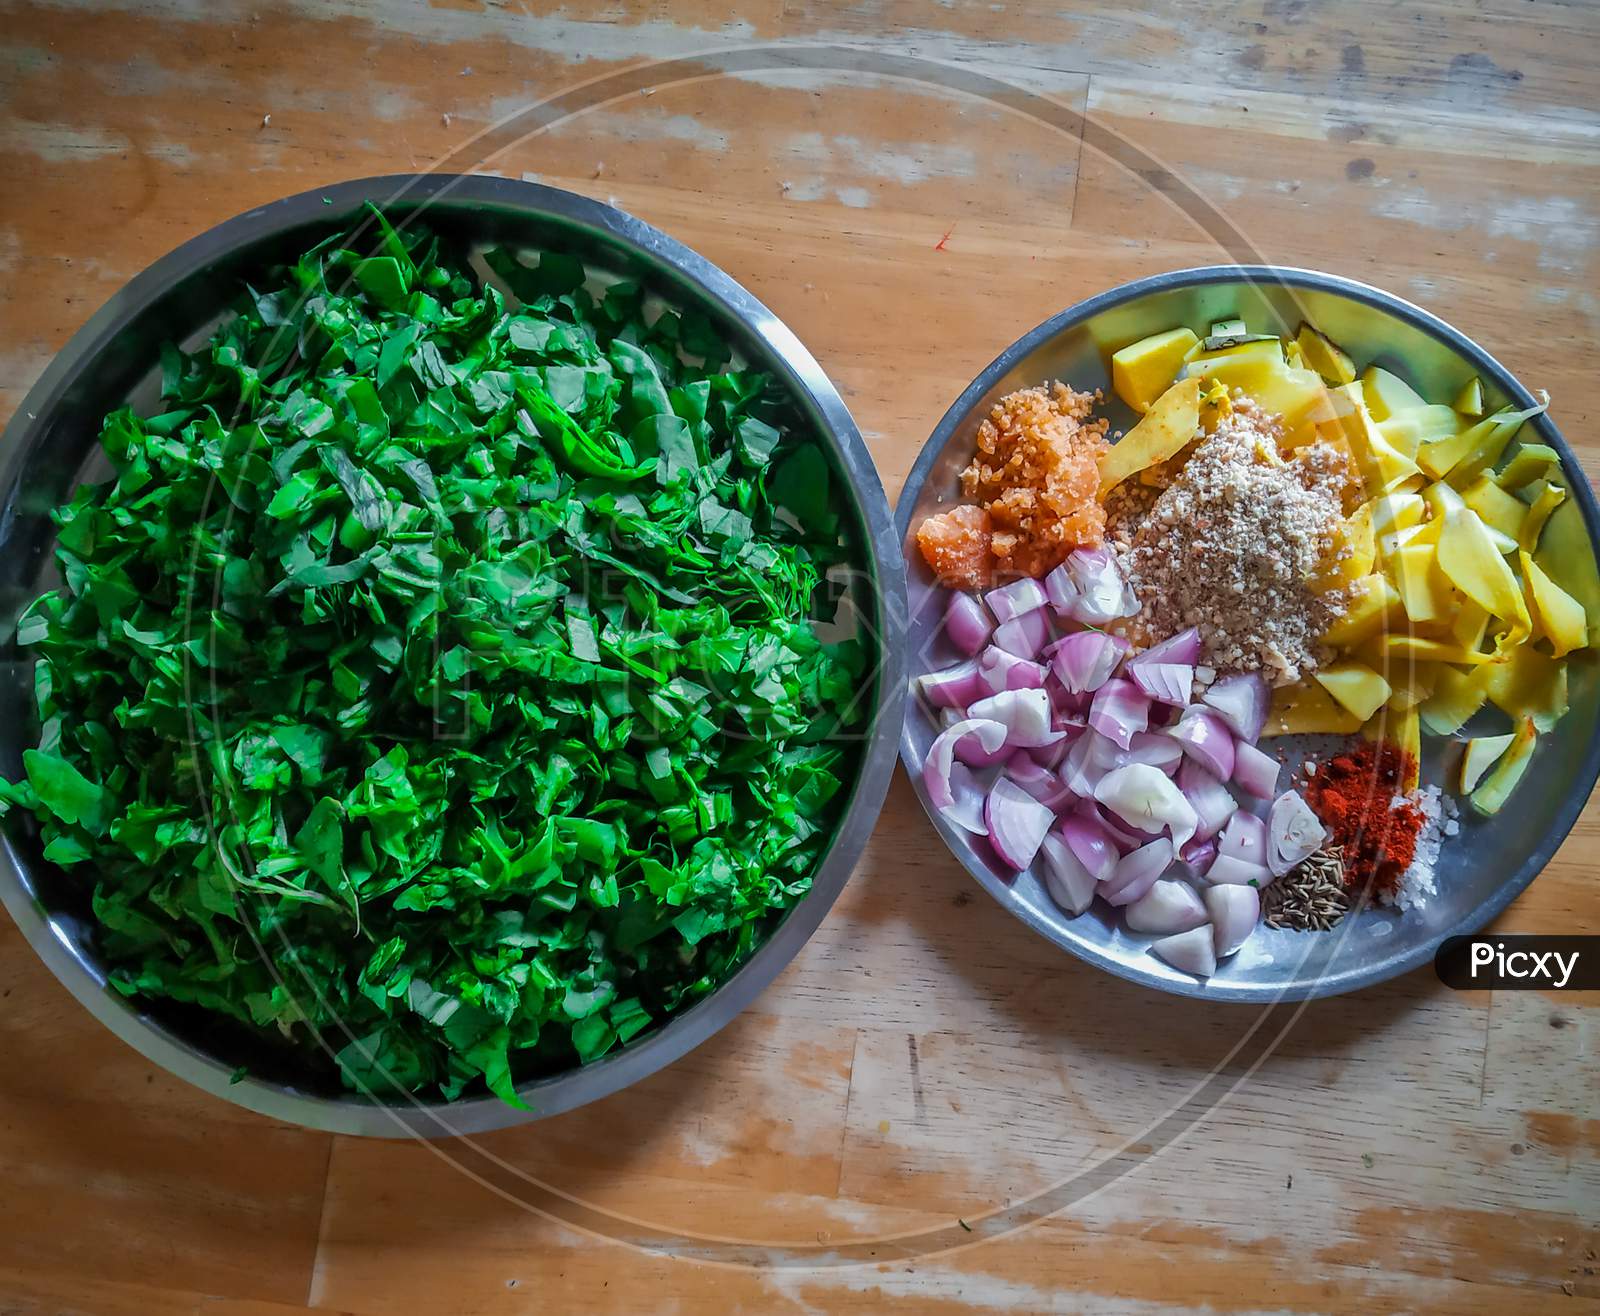 Combined Indian Spices And Ingredients For Making Spinach Curry ( Indian Cuisine ) In A Steel Plate With Wooden Background.